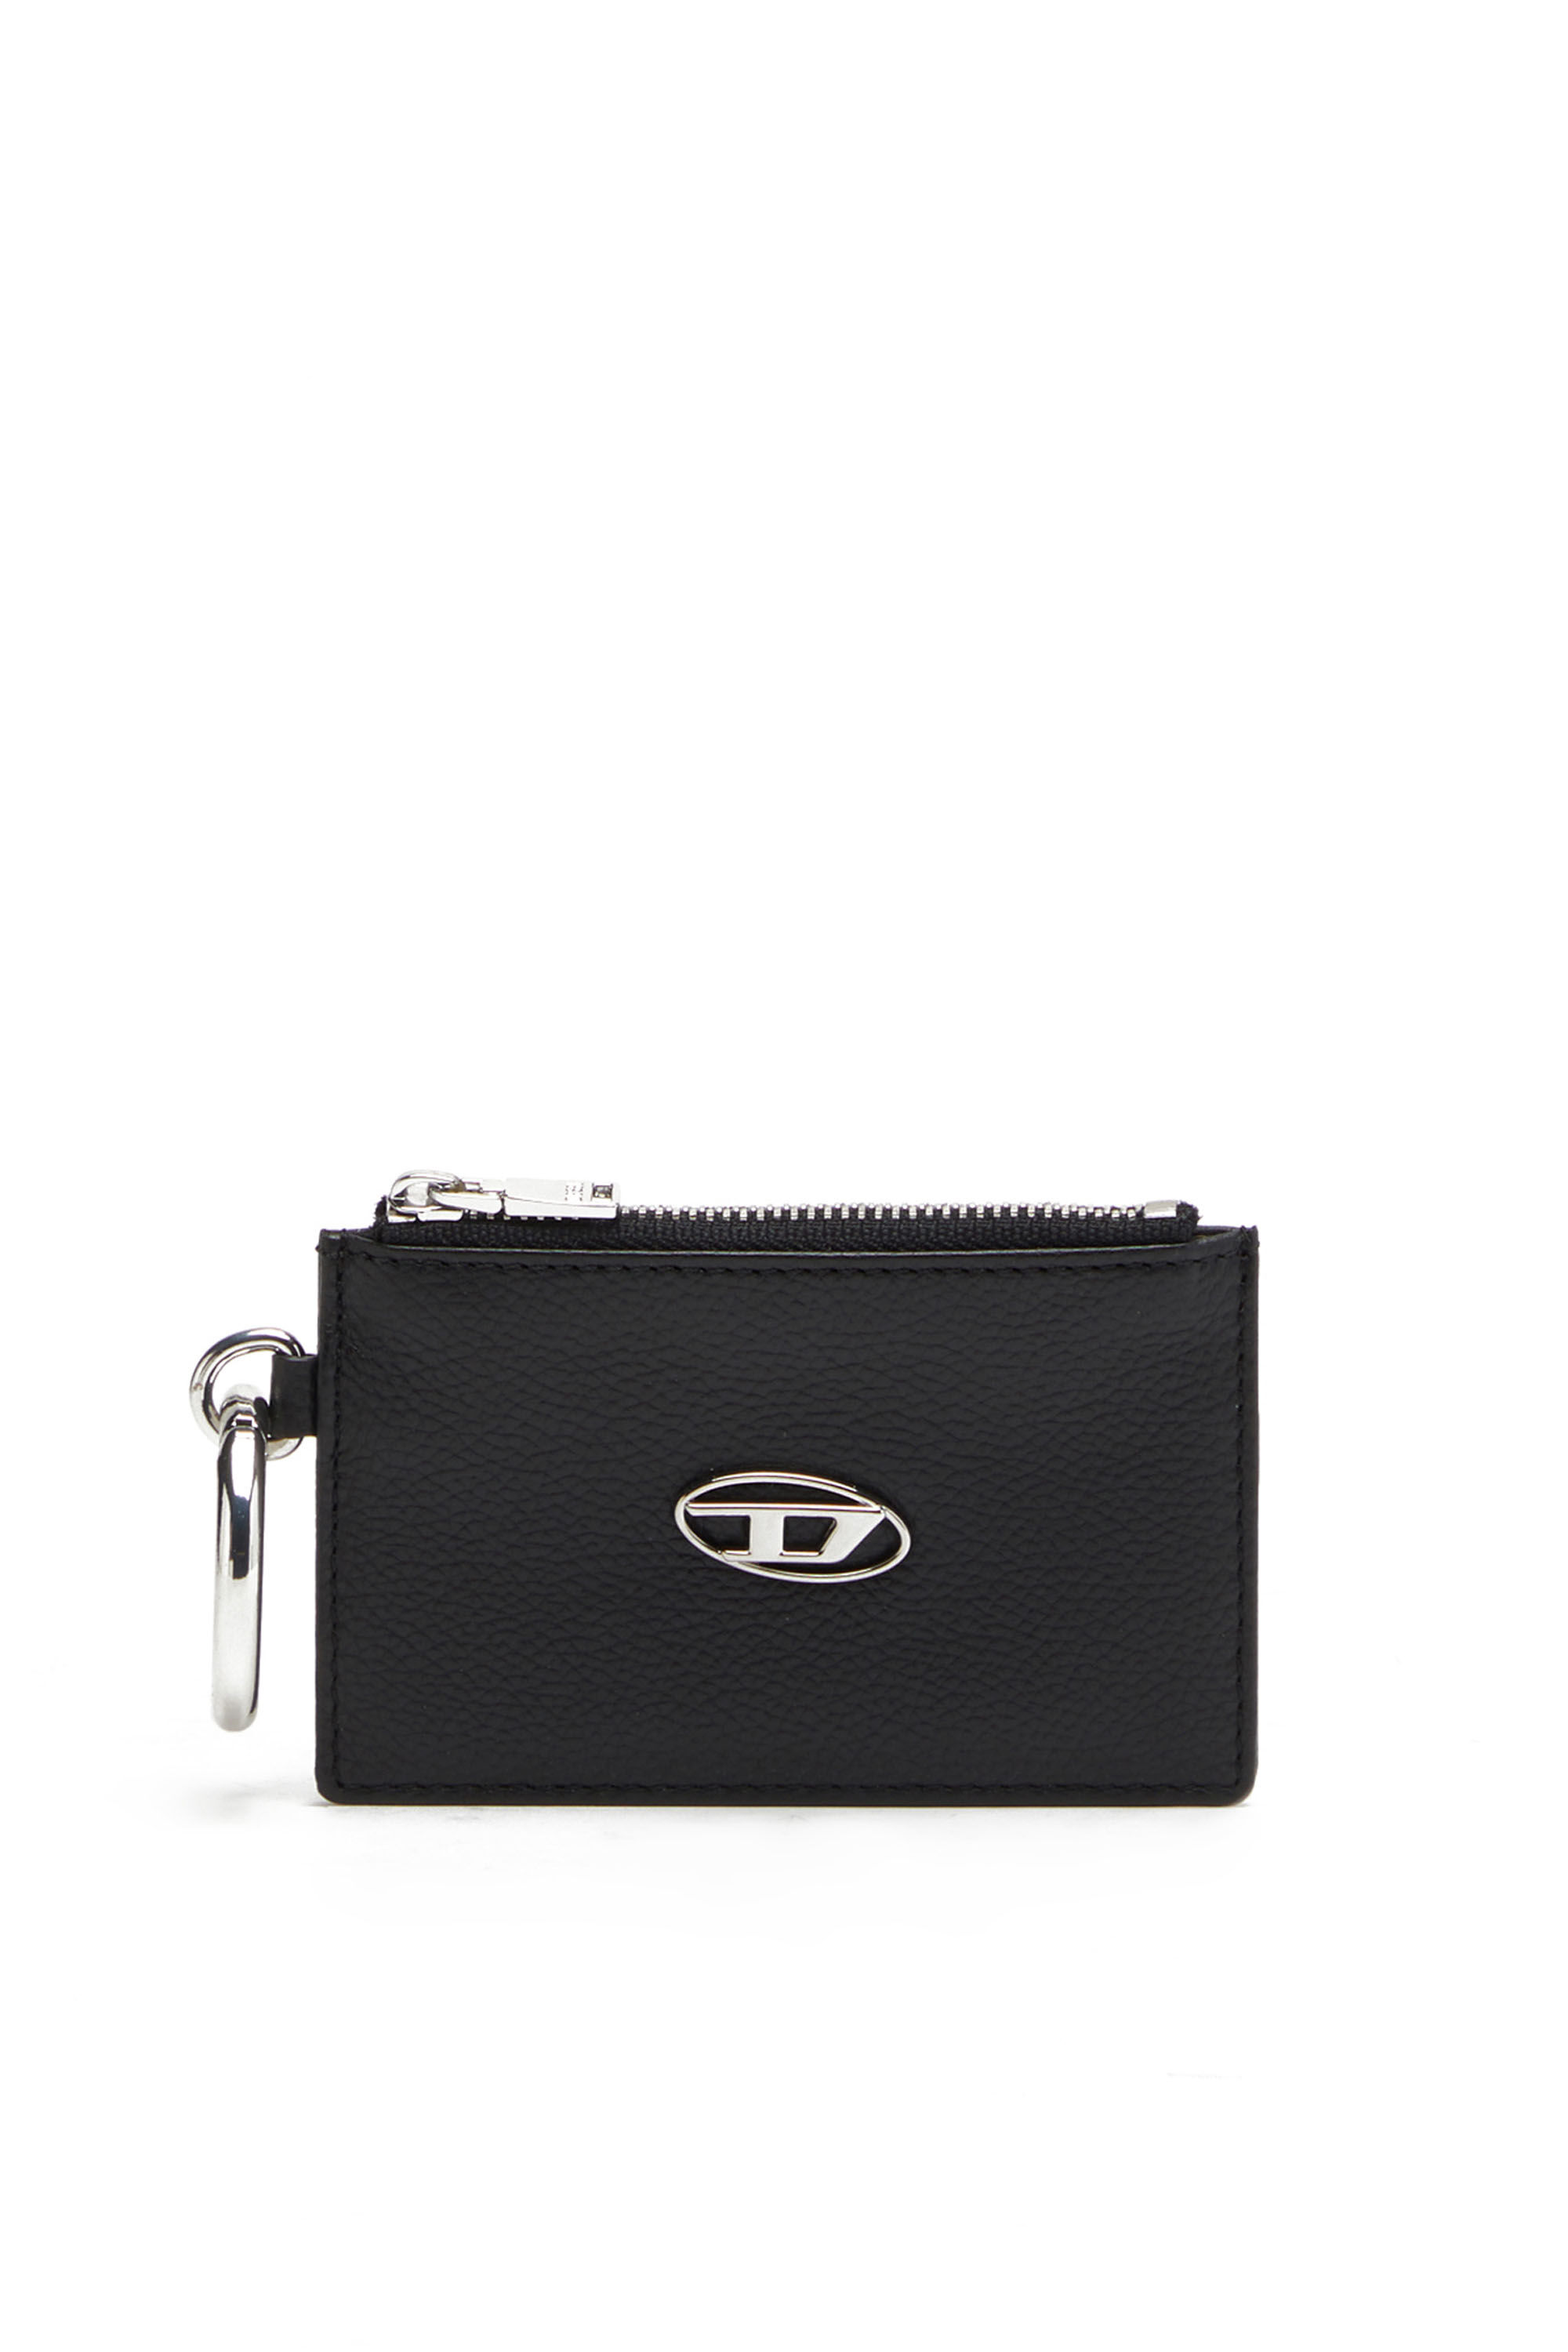 Diesel - CARD POUCH, Unisex Slim leather coin and card holder in Black - Image 1